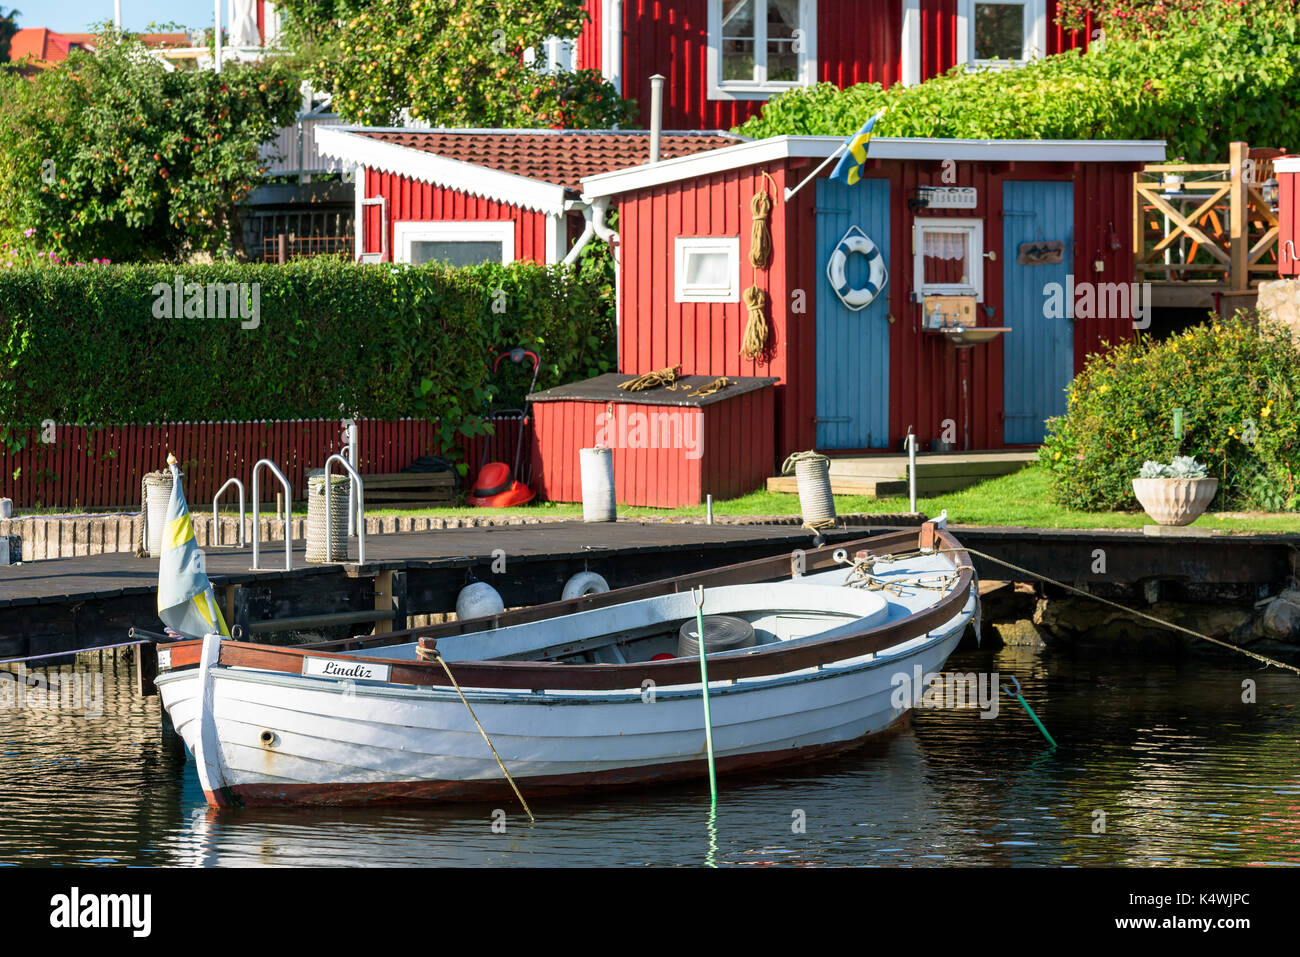 Karlskrona, Sweden - August 28, 2017: Travel documentary of the city surroundings. White open wooden motorboat moored to a pier in front of fishing sh Stock Photo